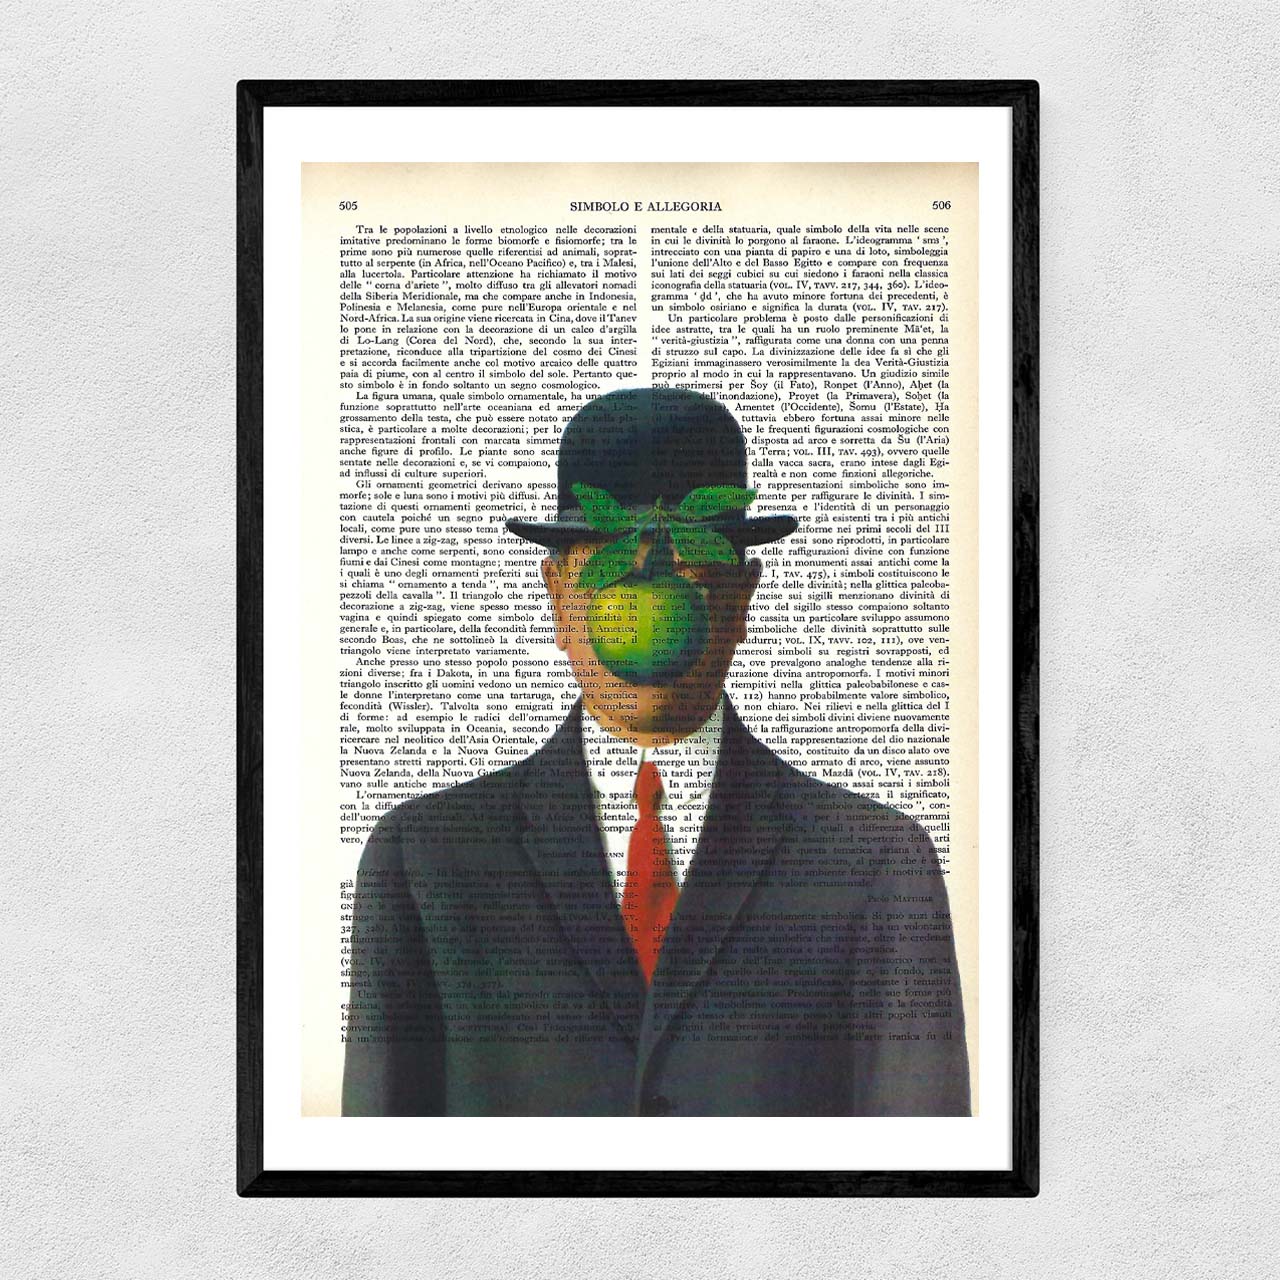 Mix-up: The Son of Man – René Magritte